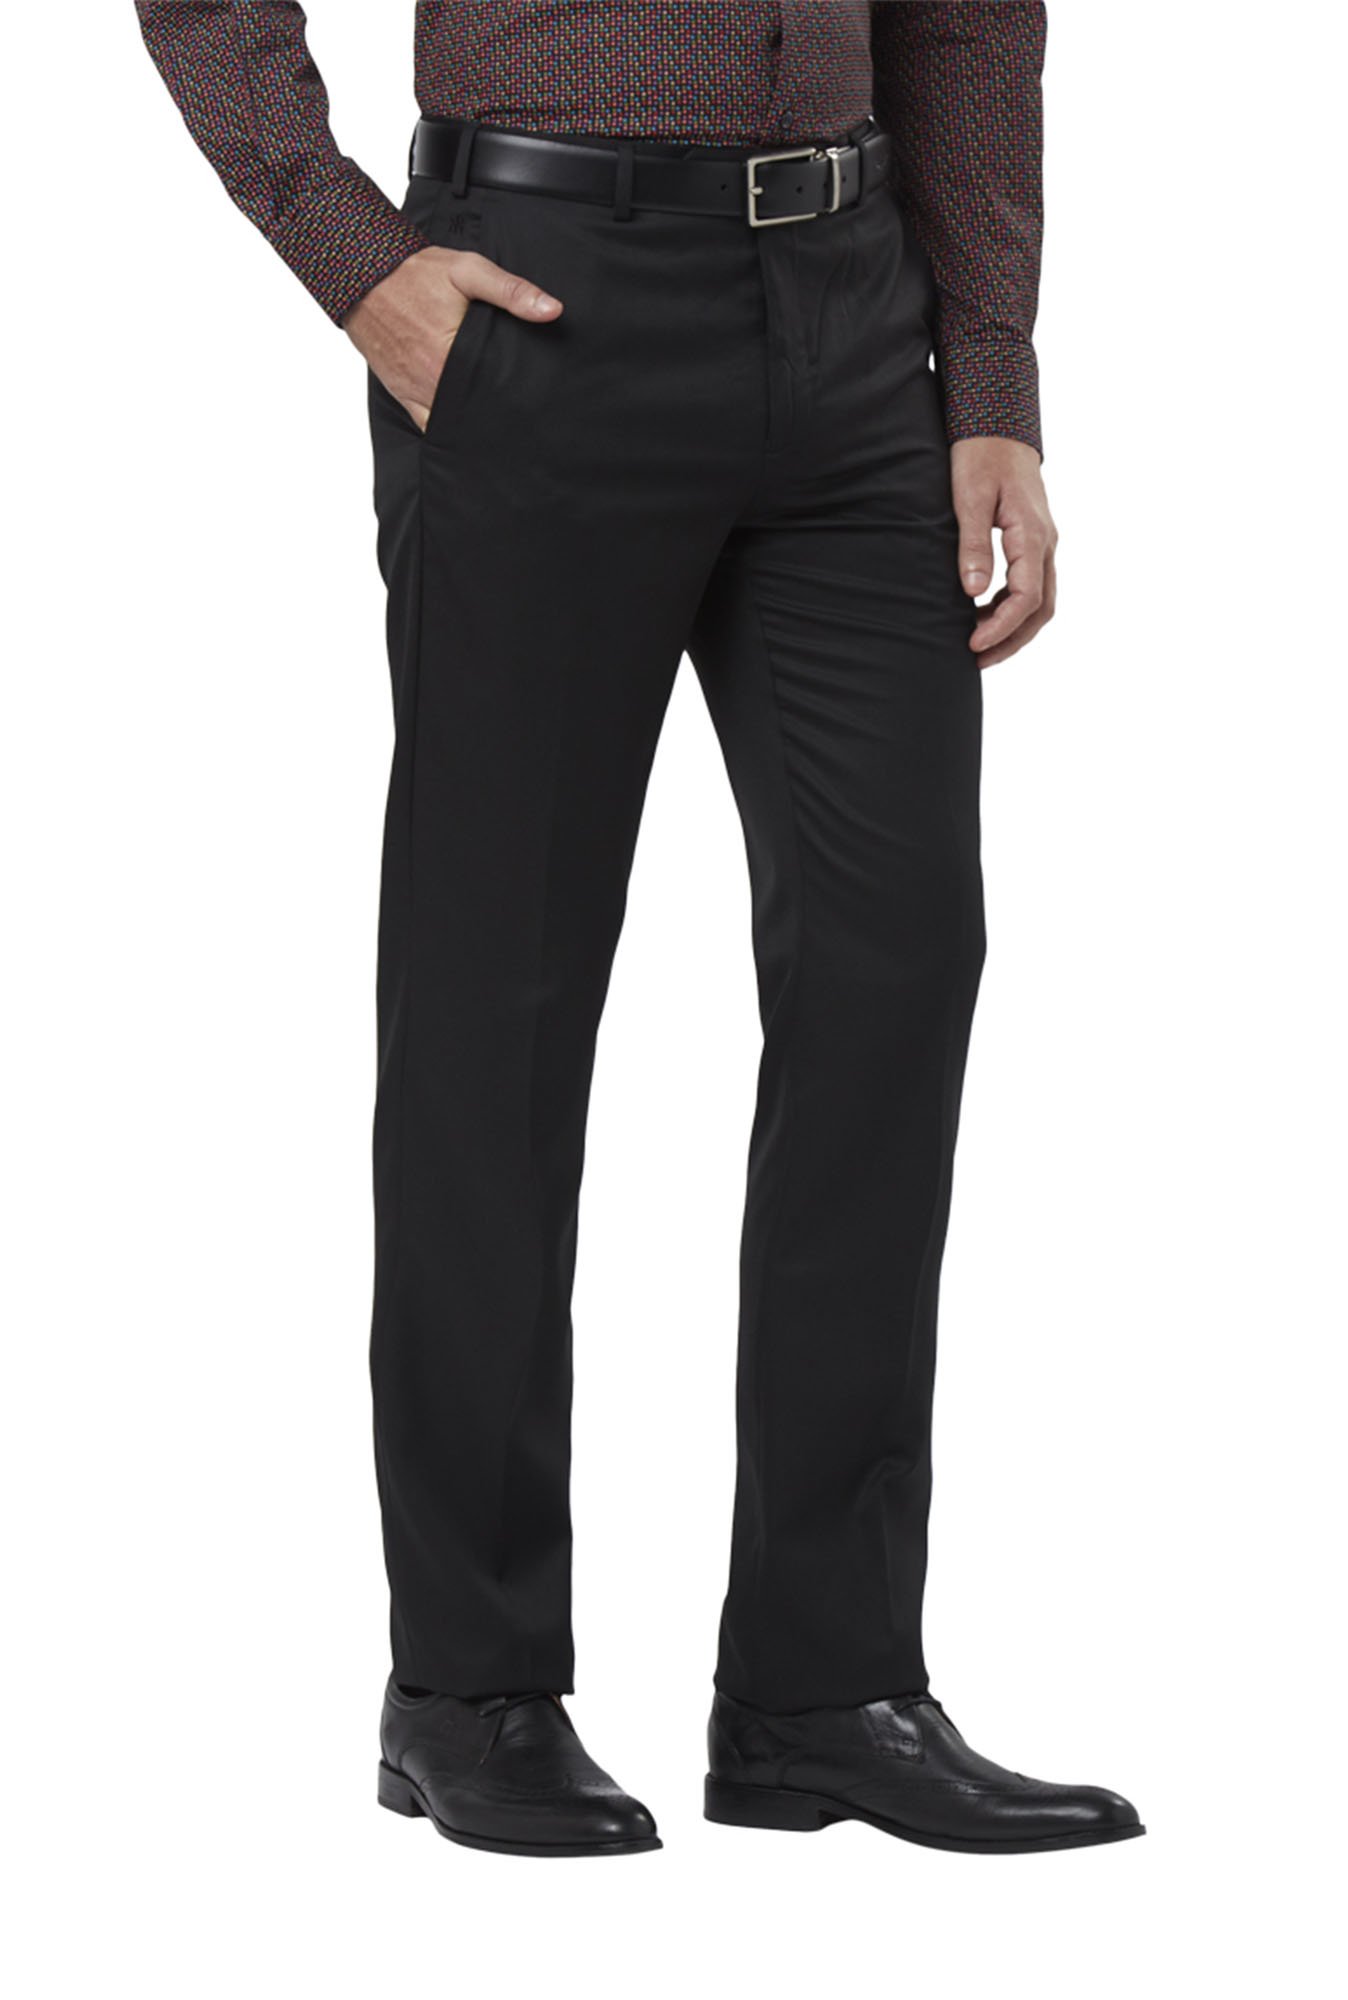 Buy Raymond Men Solid Slim Fit Formal Trouser  Blue Online at Low Prices  in India  Paytmmallcom